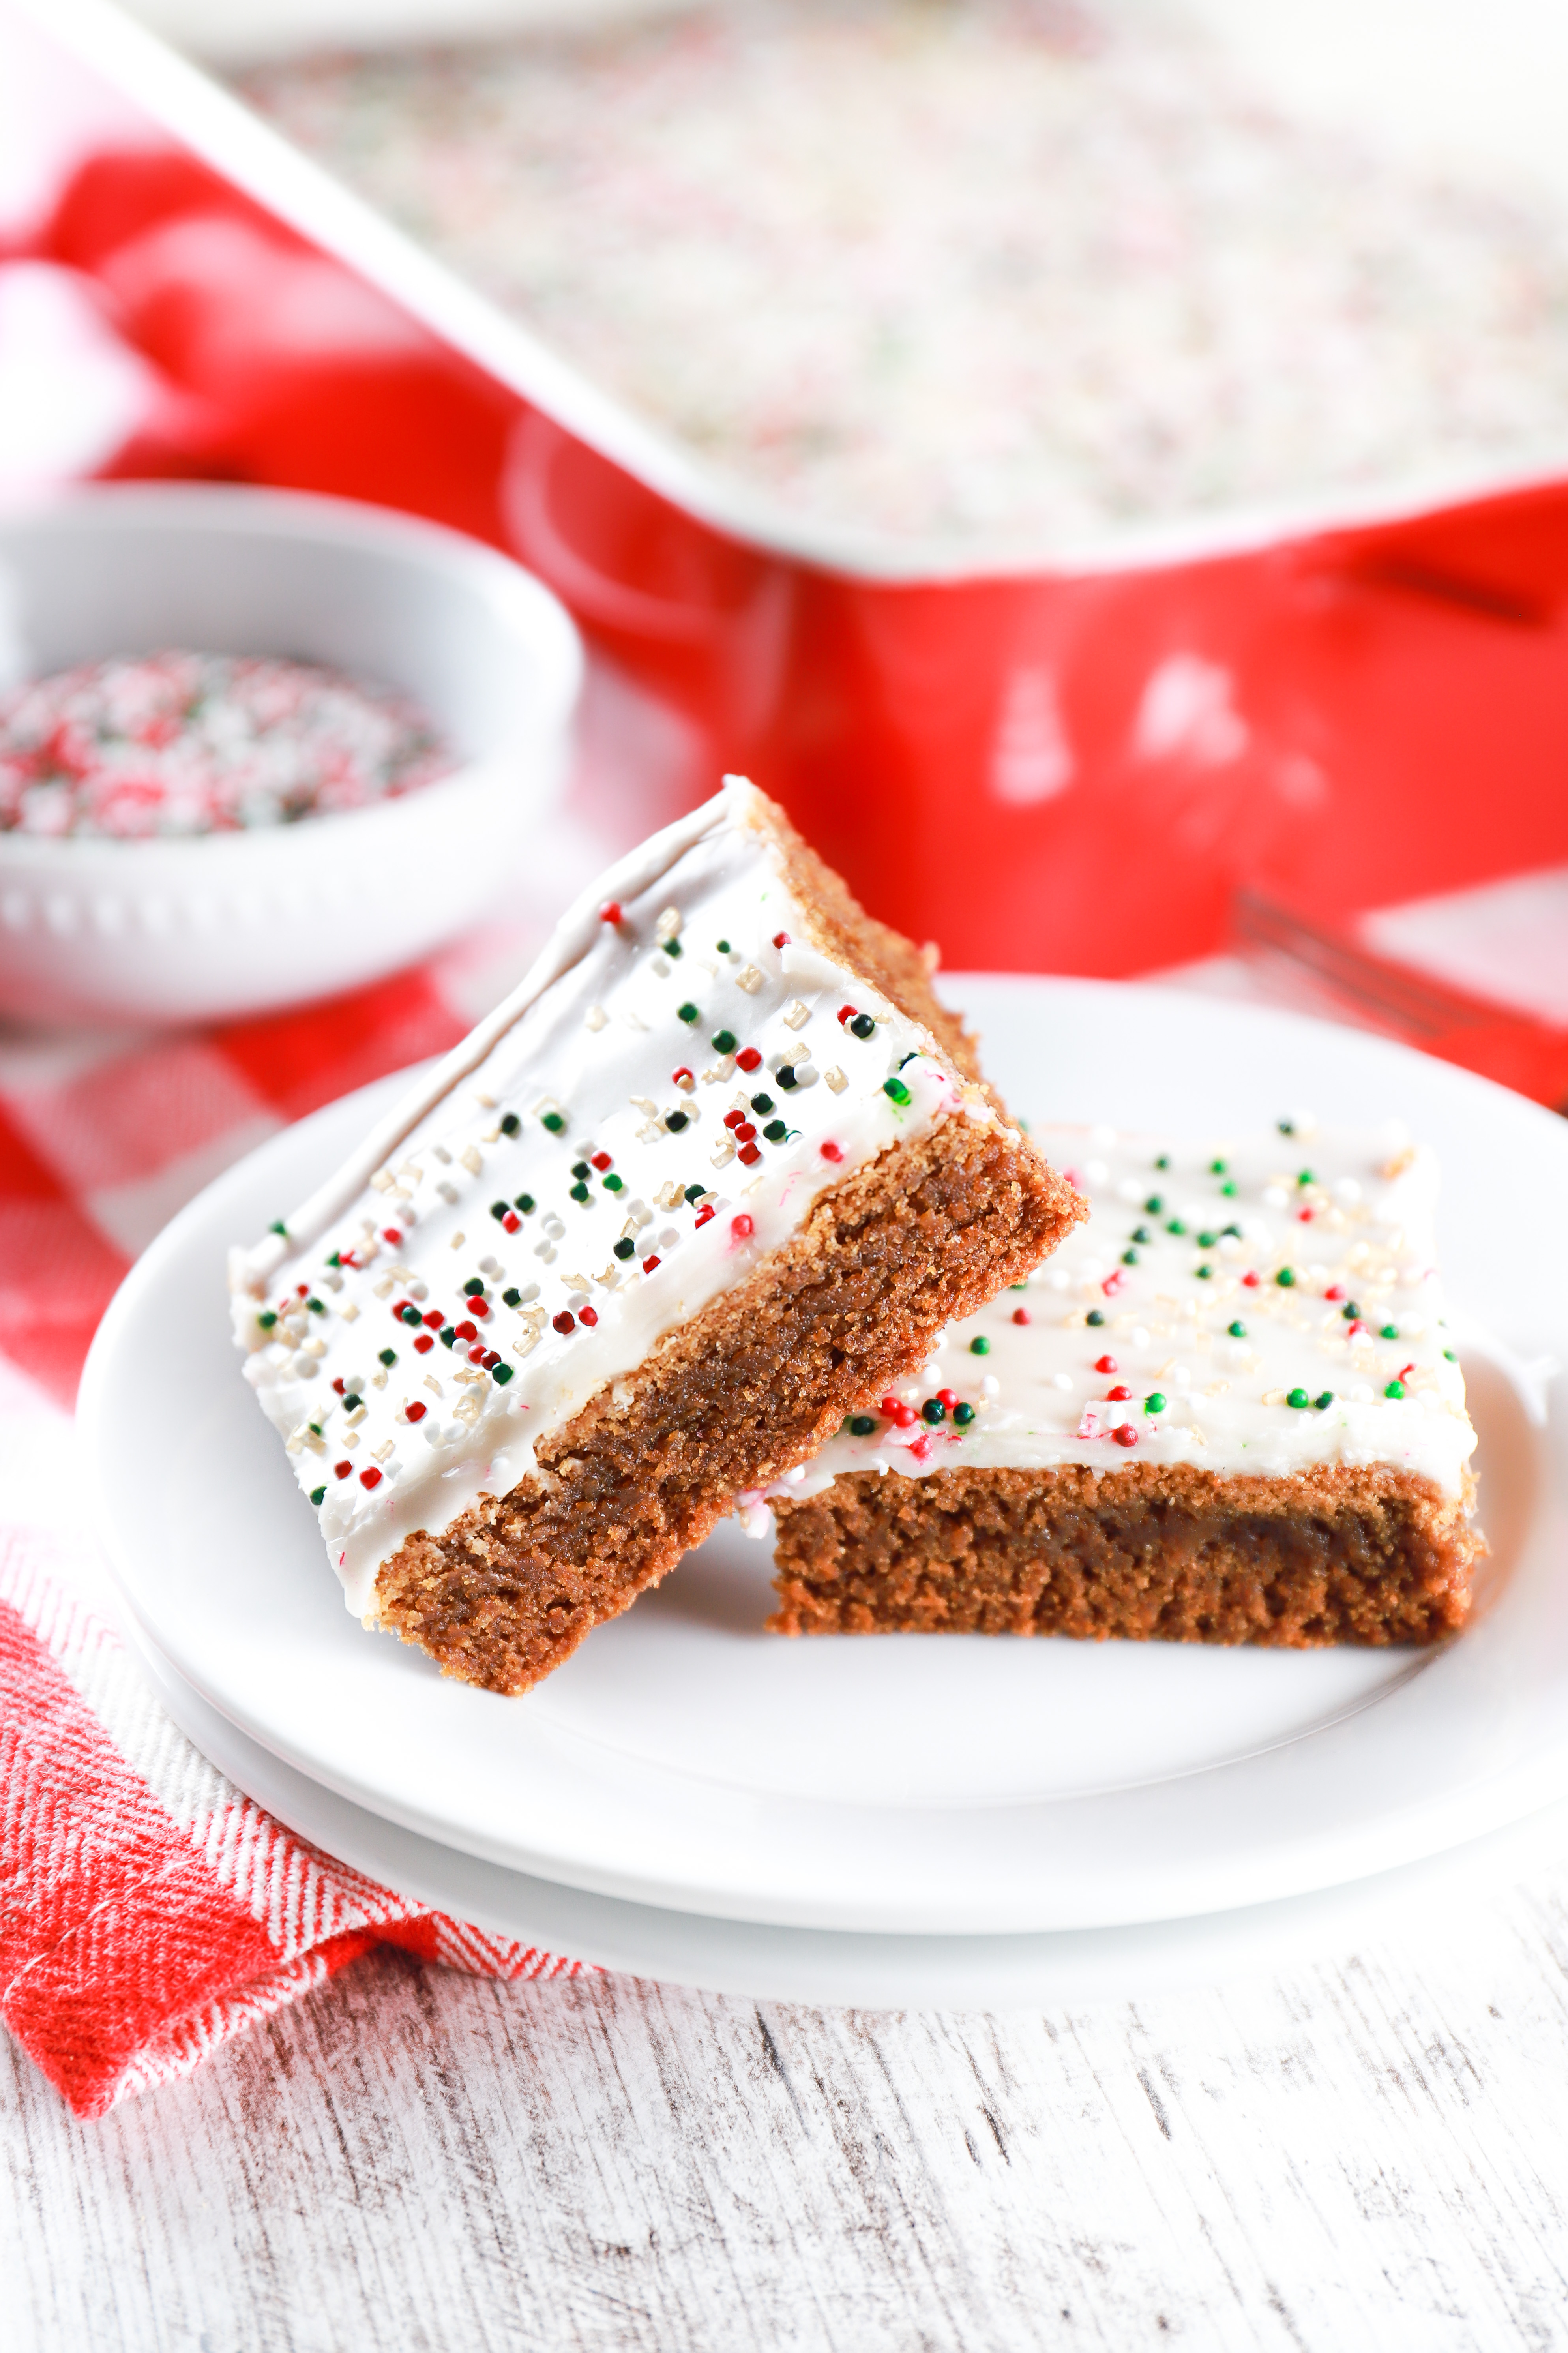 Two glazed gingerbread bars on a small white plate with a red baking dish in the background.